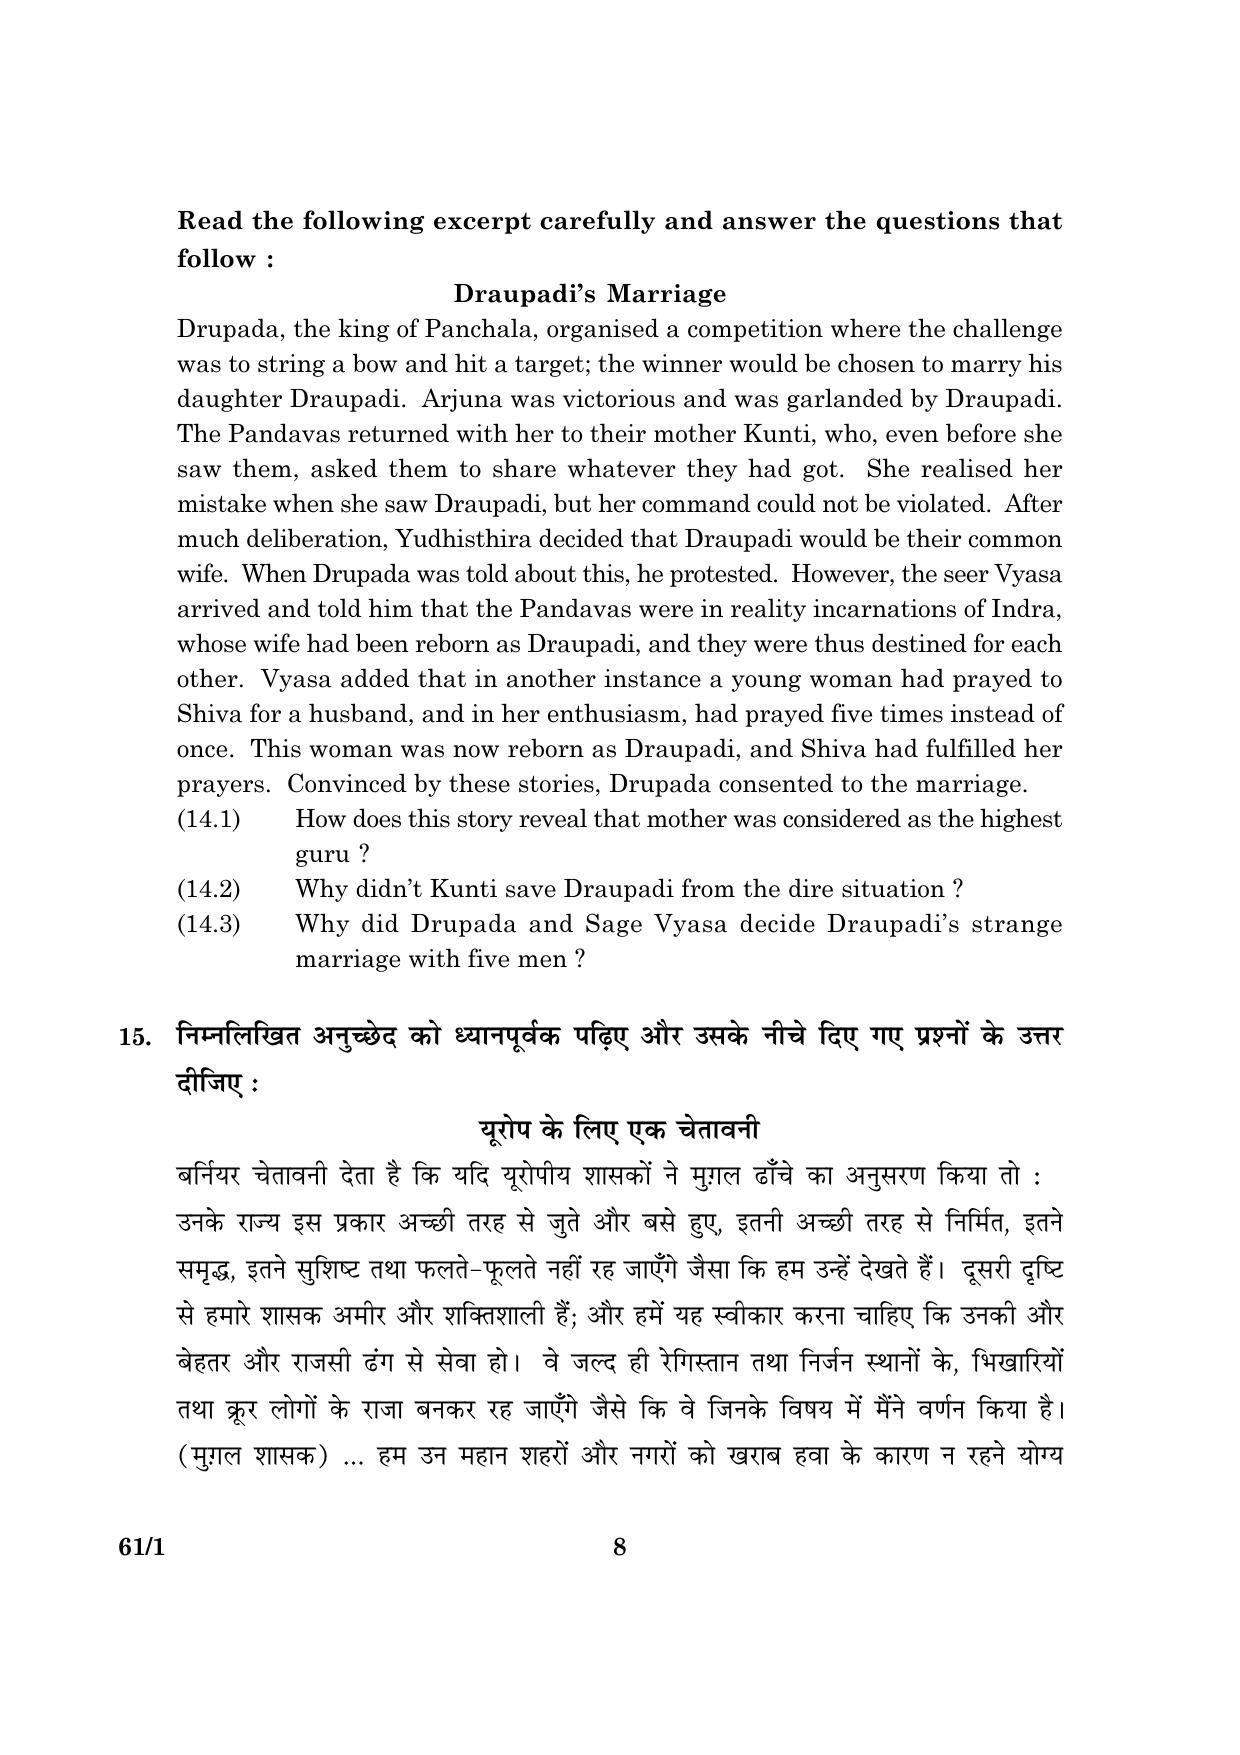 CBSE Class 12 061 Set 1 History 2016 Question Paper - Page 8